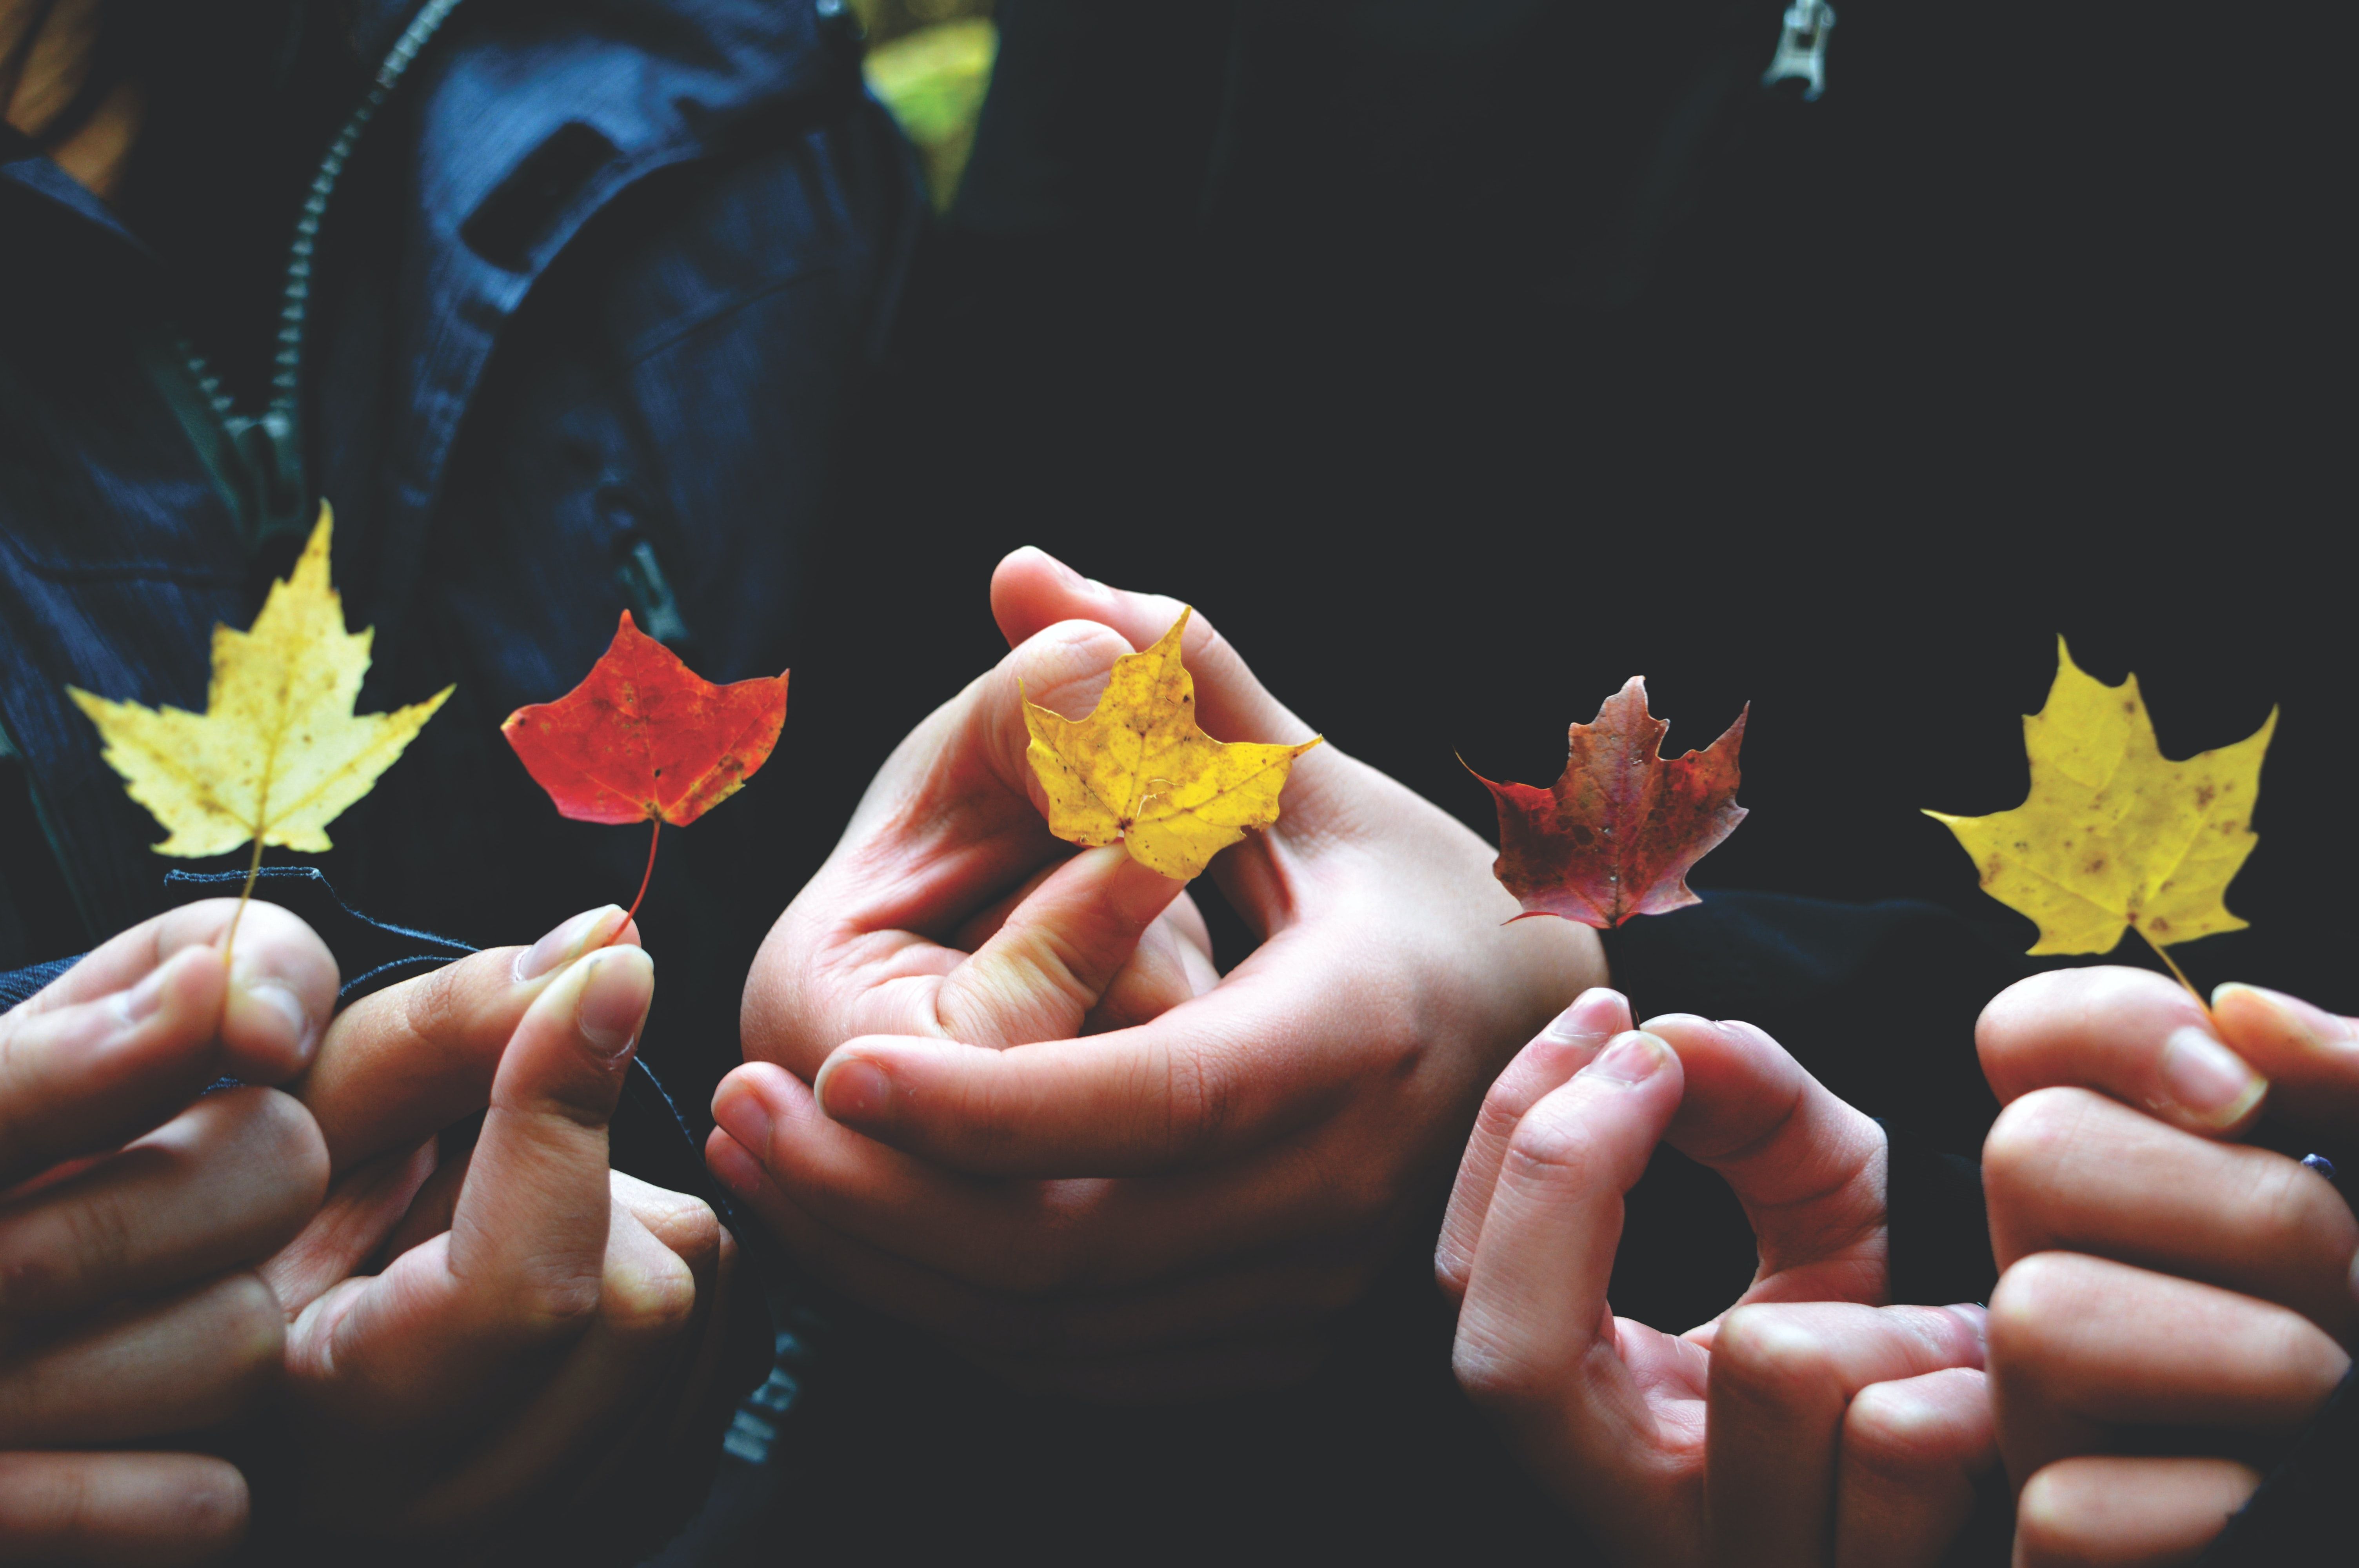 Five hands each holding one colorful fall leaf